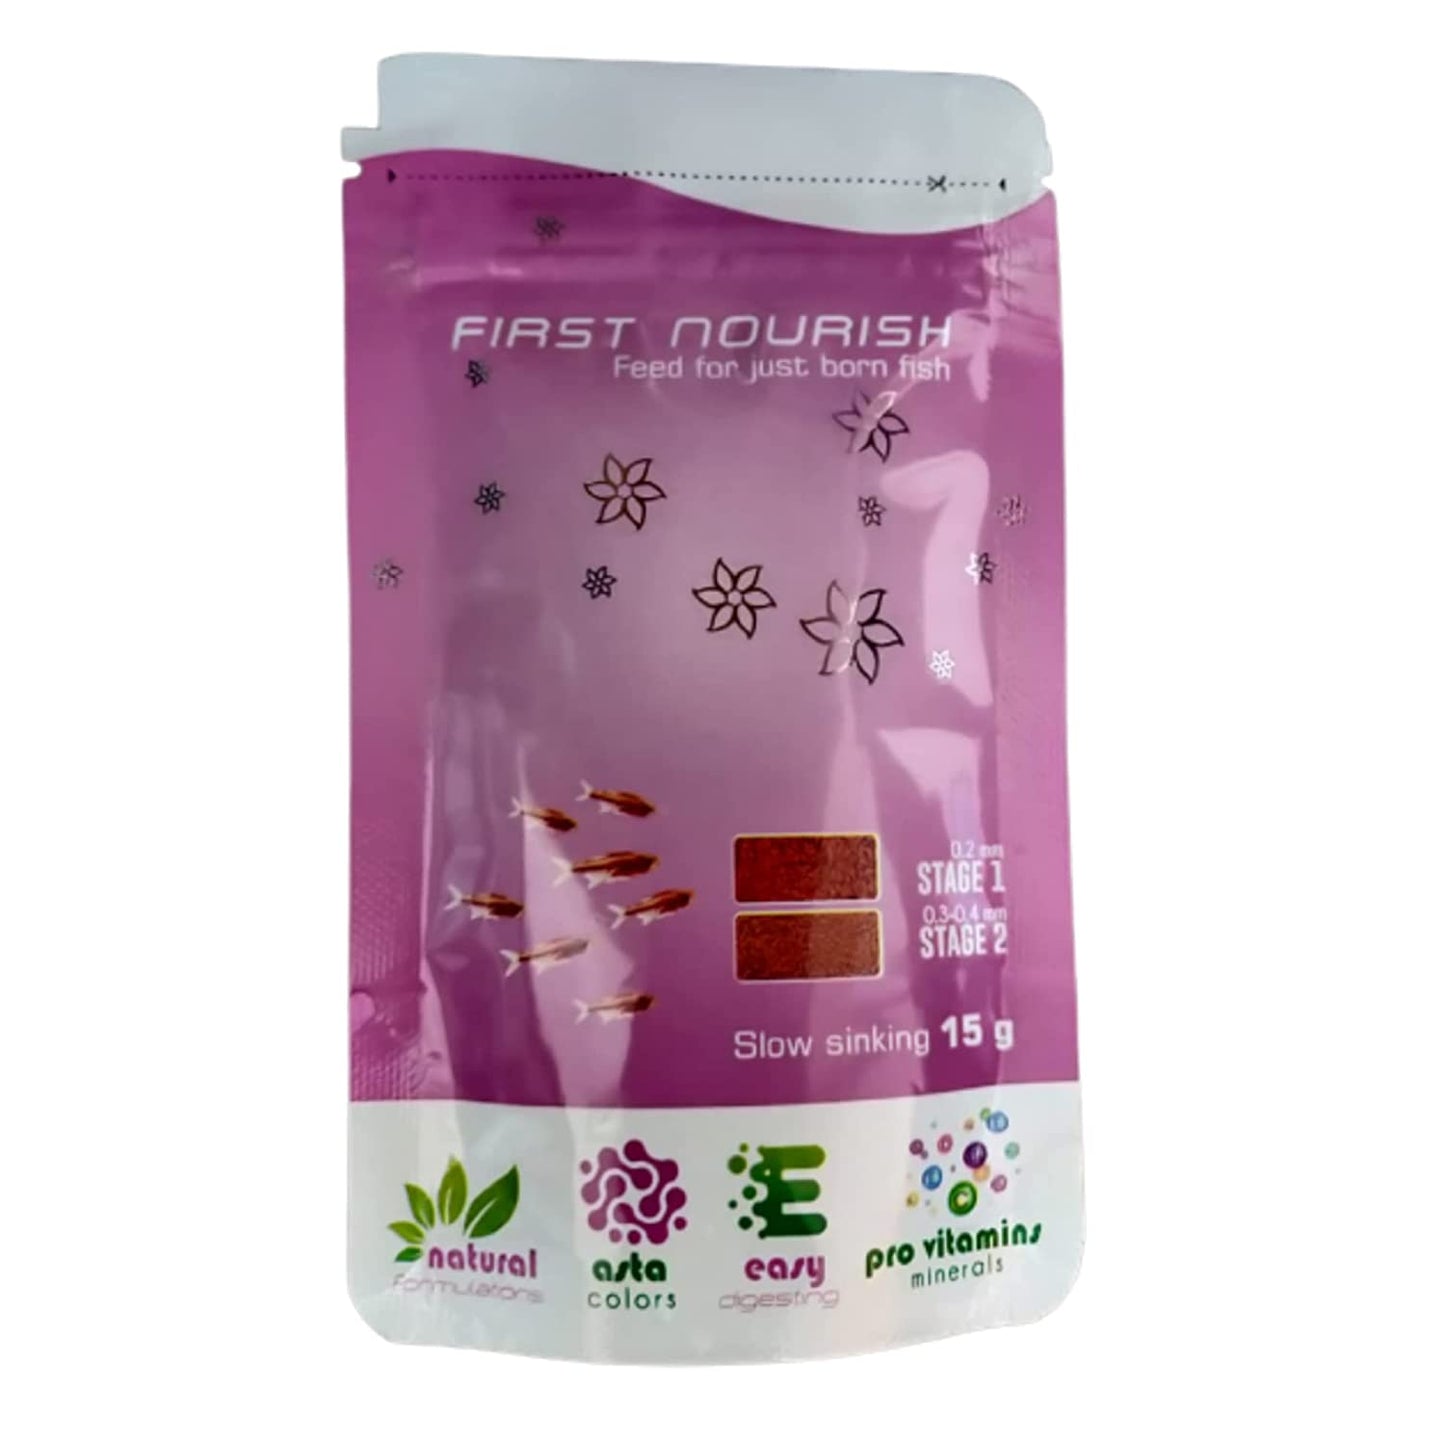 WA First Nourish | Baby Fish Food | Stage 1 & 2 | 2 Packs (15g +15g) | for All Types of Baby Fishes